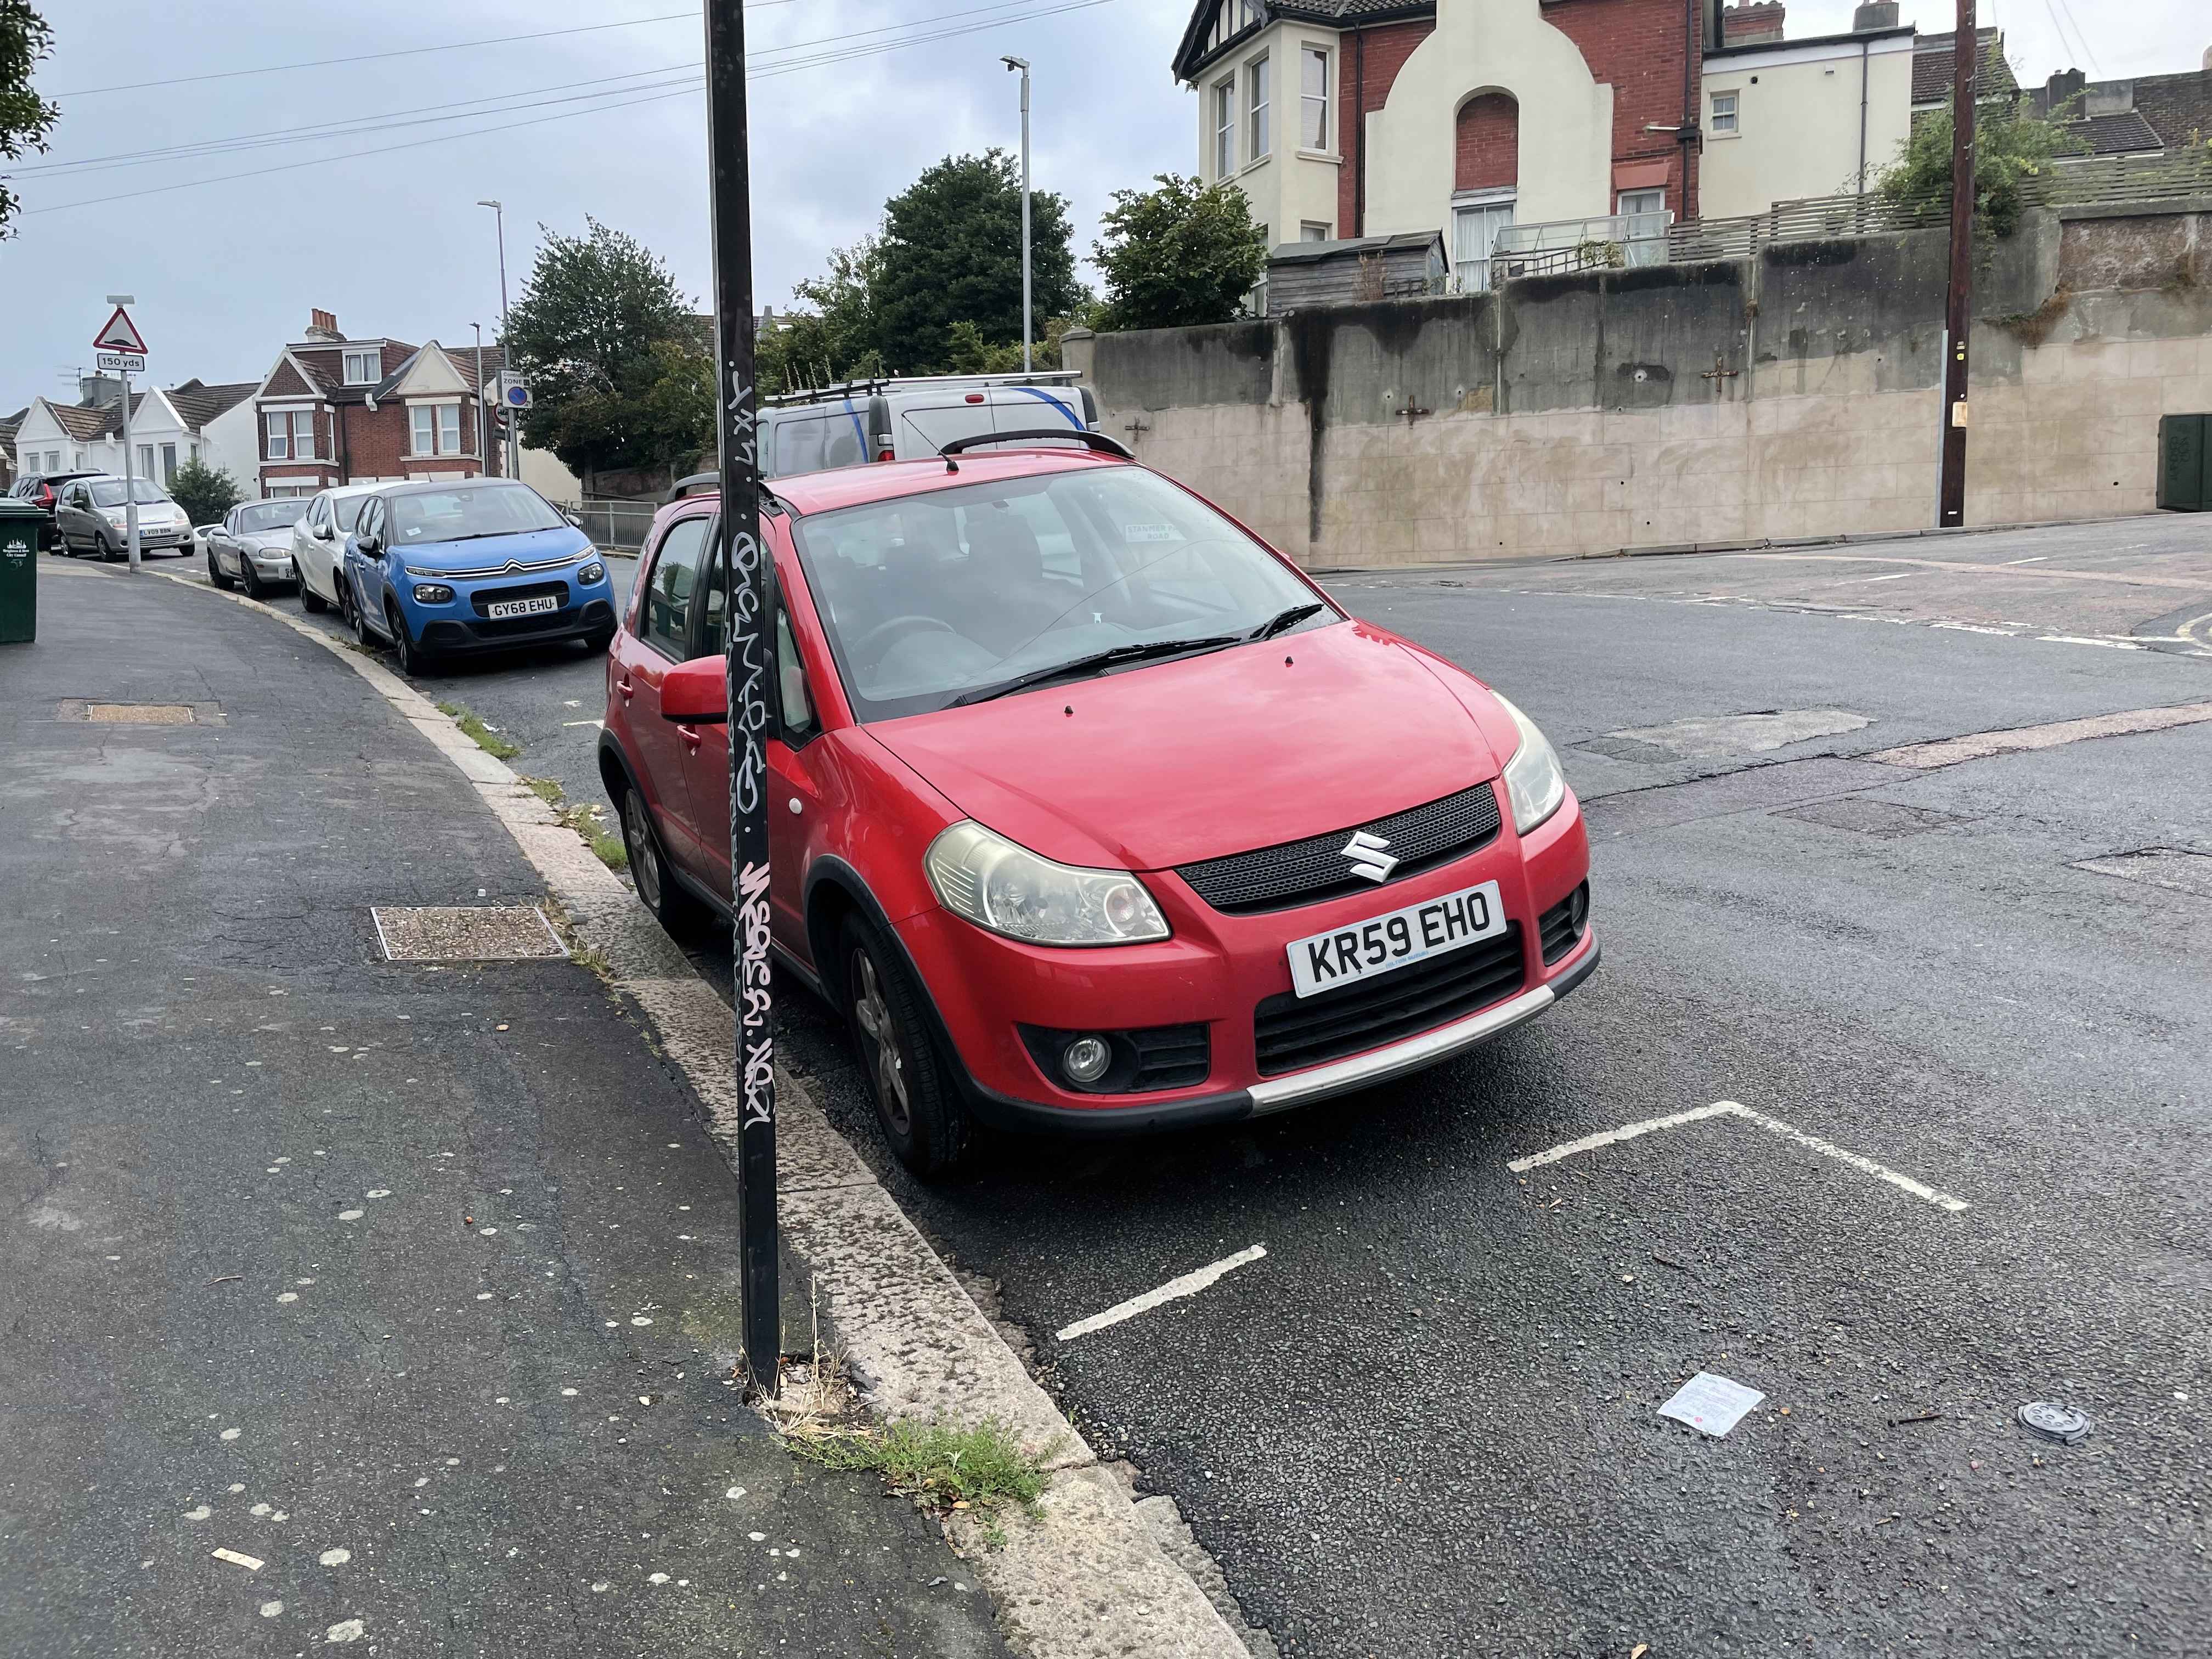 Photograph of KR59 EHO - a Red Suzuki SX4 parked in Hollingdean by a non-resident who uses the local area as part of their Brighton commute. The first of four photographs supplied by the residents of Hollingdean.